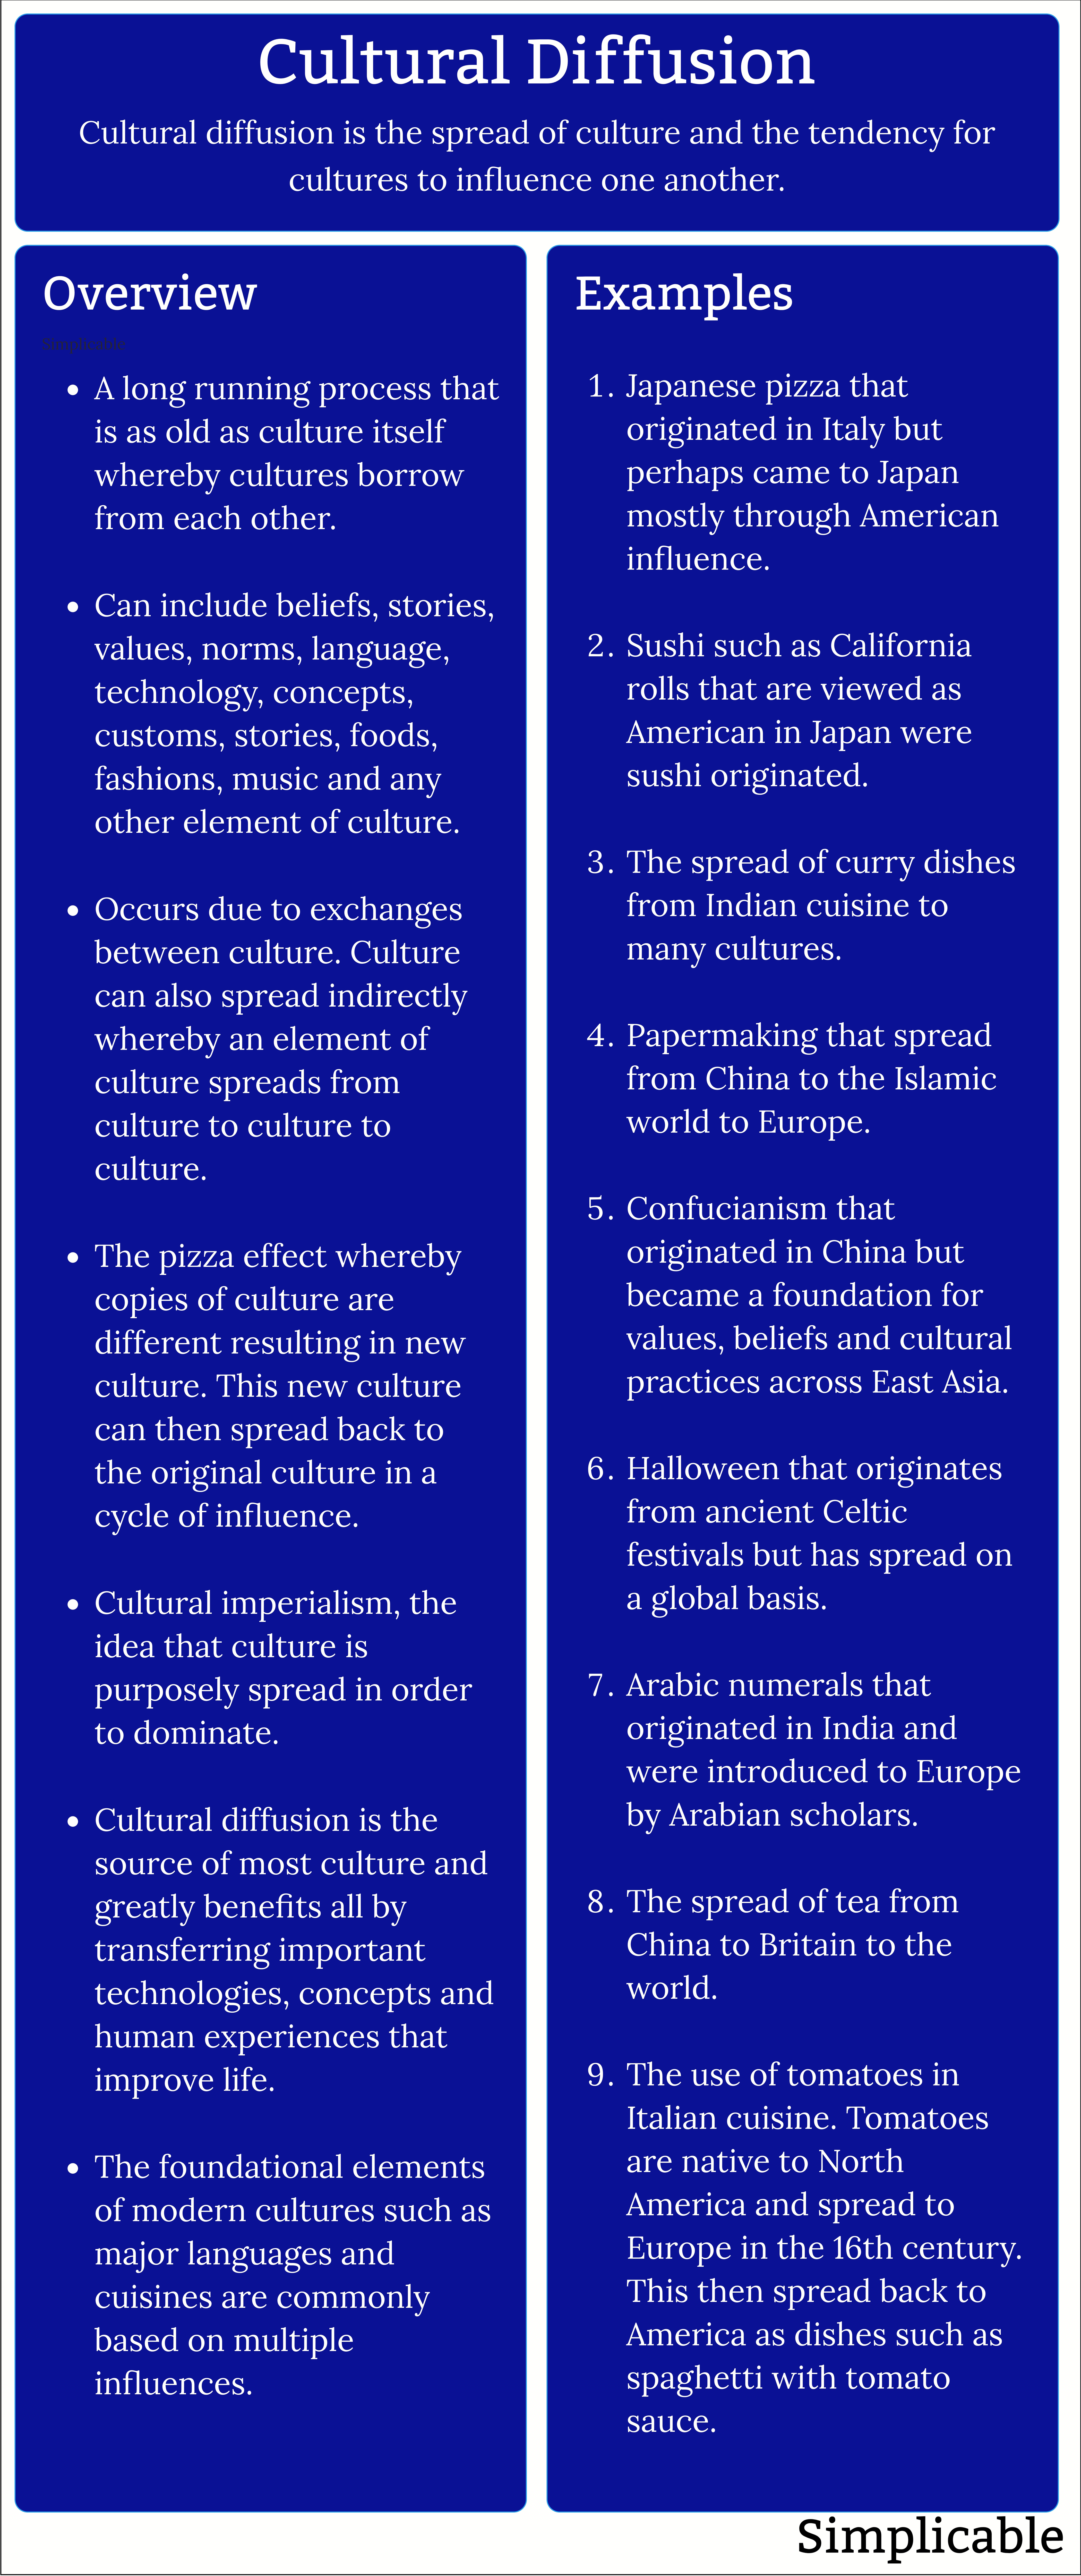 cultural diffusion overview and examples